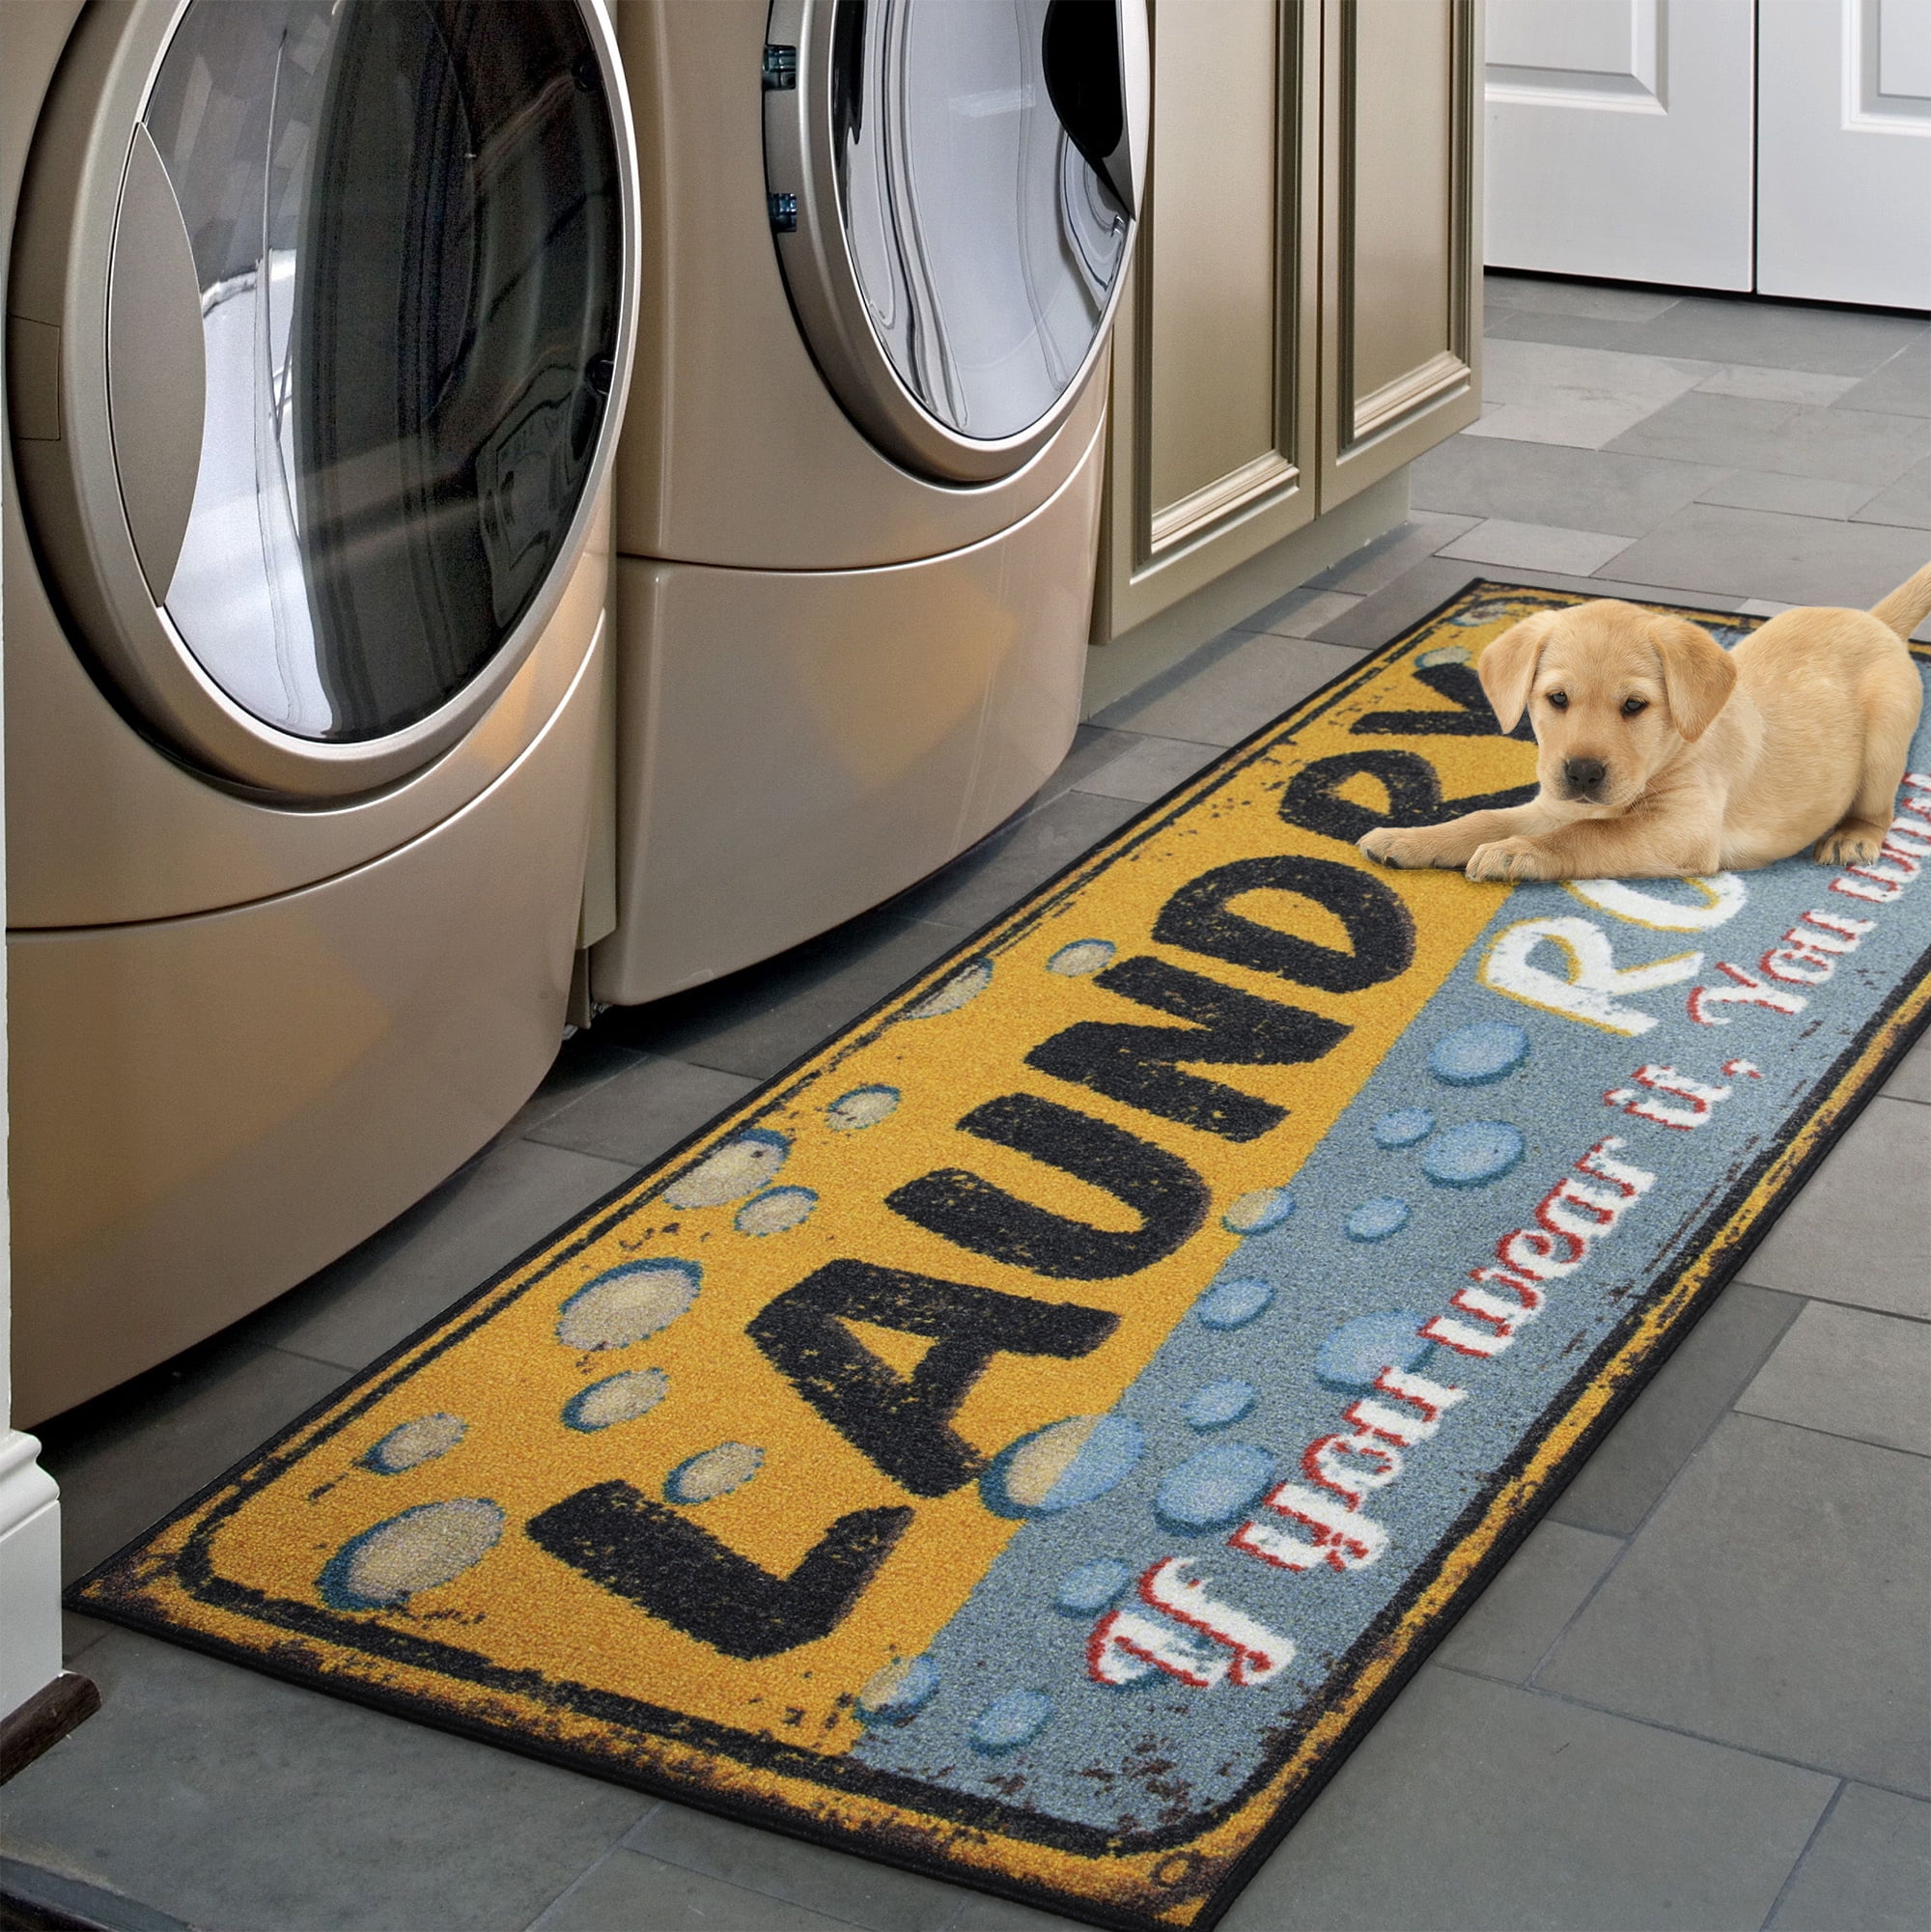 Details about   LAUNDRY RUNNER RUG Room Decorative Carpet Printed Navy Blue 20 X 59 OTTOMANSON 